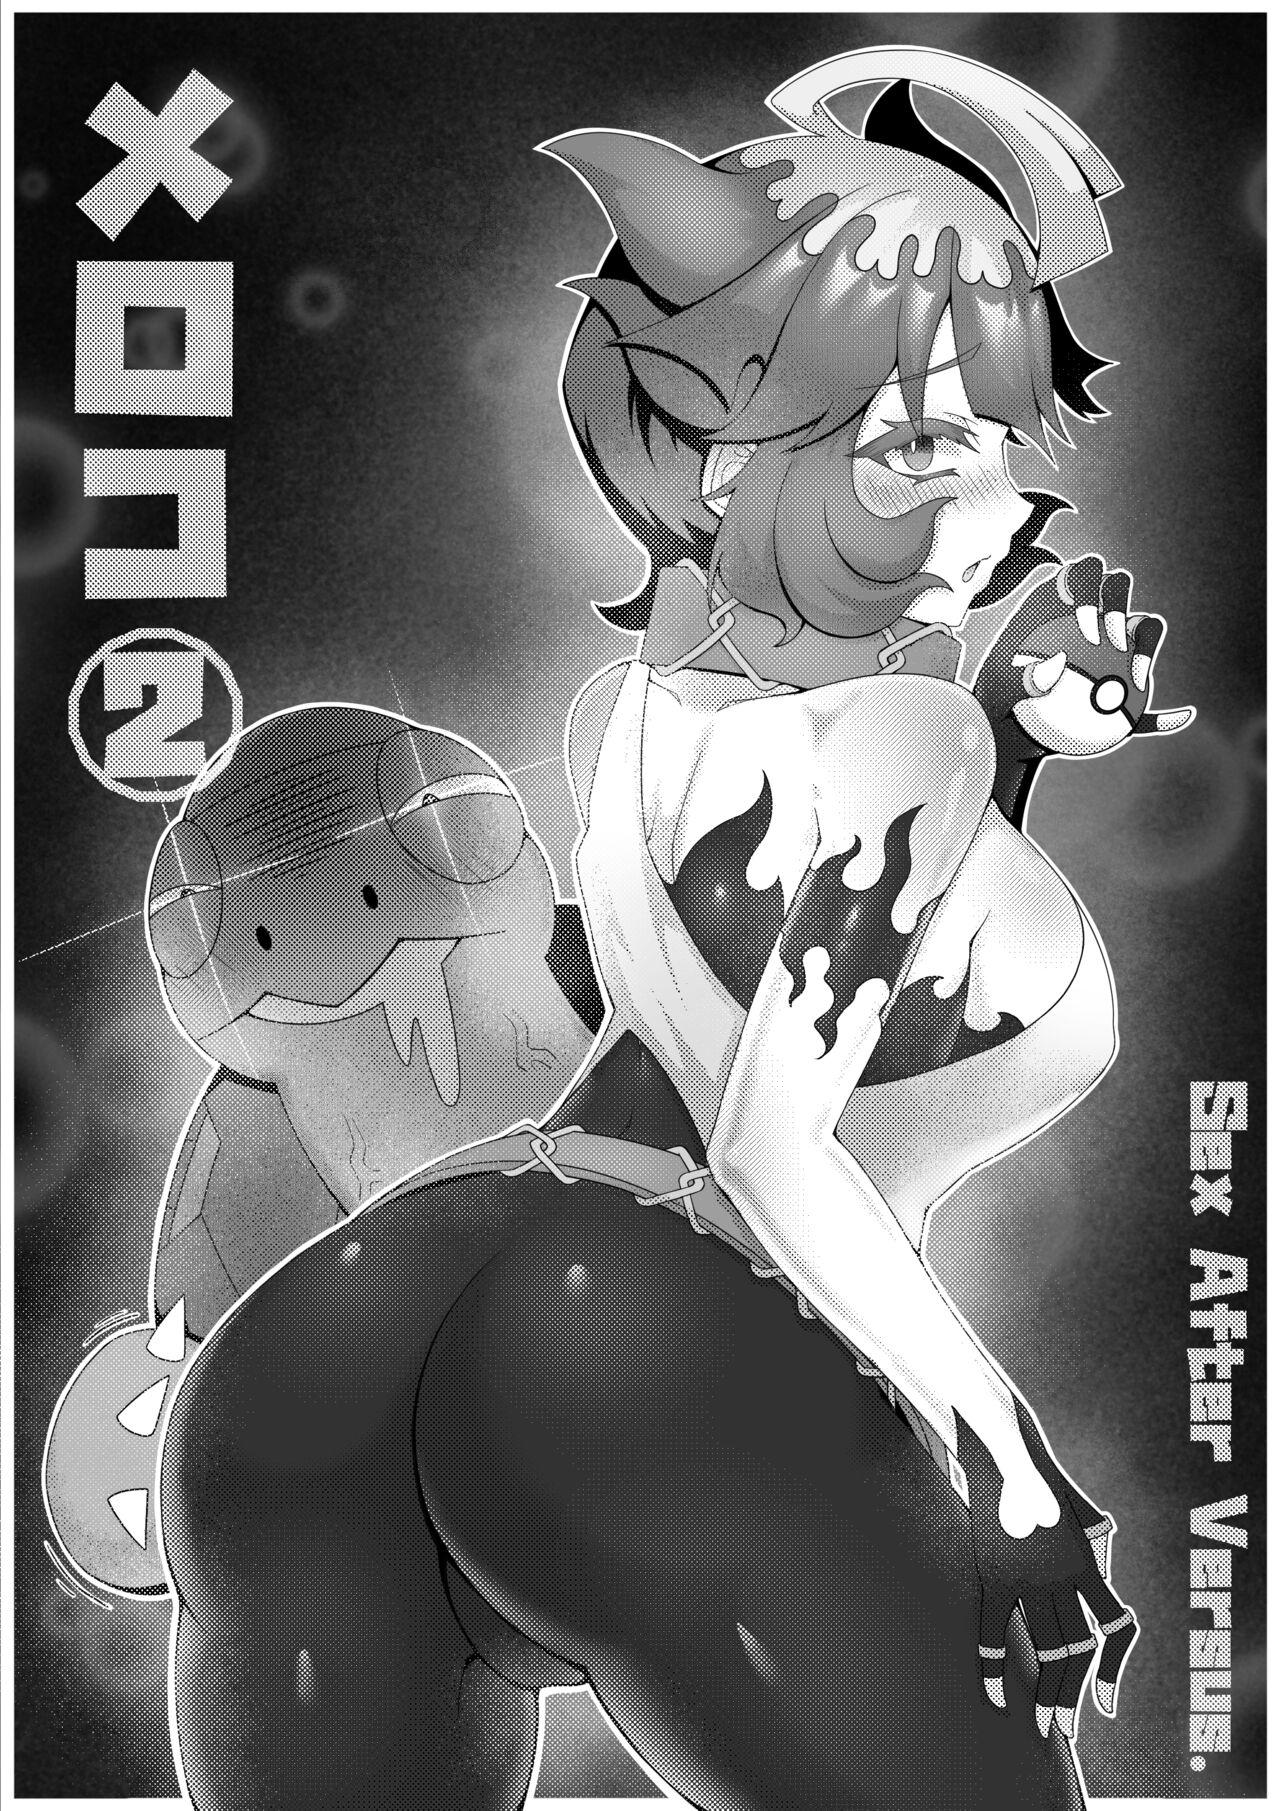 Family Taboo Sex after Versus - Meloco 2 - Pokemon | pocket monsters Amateur Porn Free - Page 1